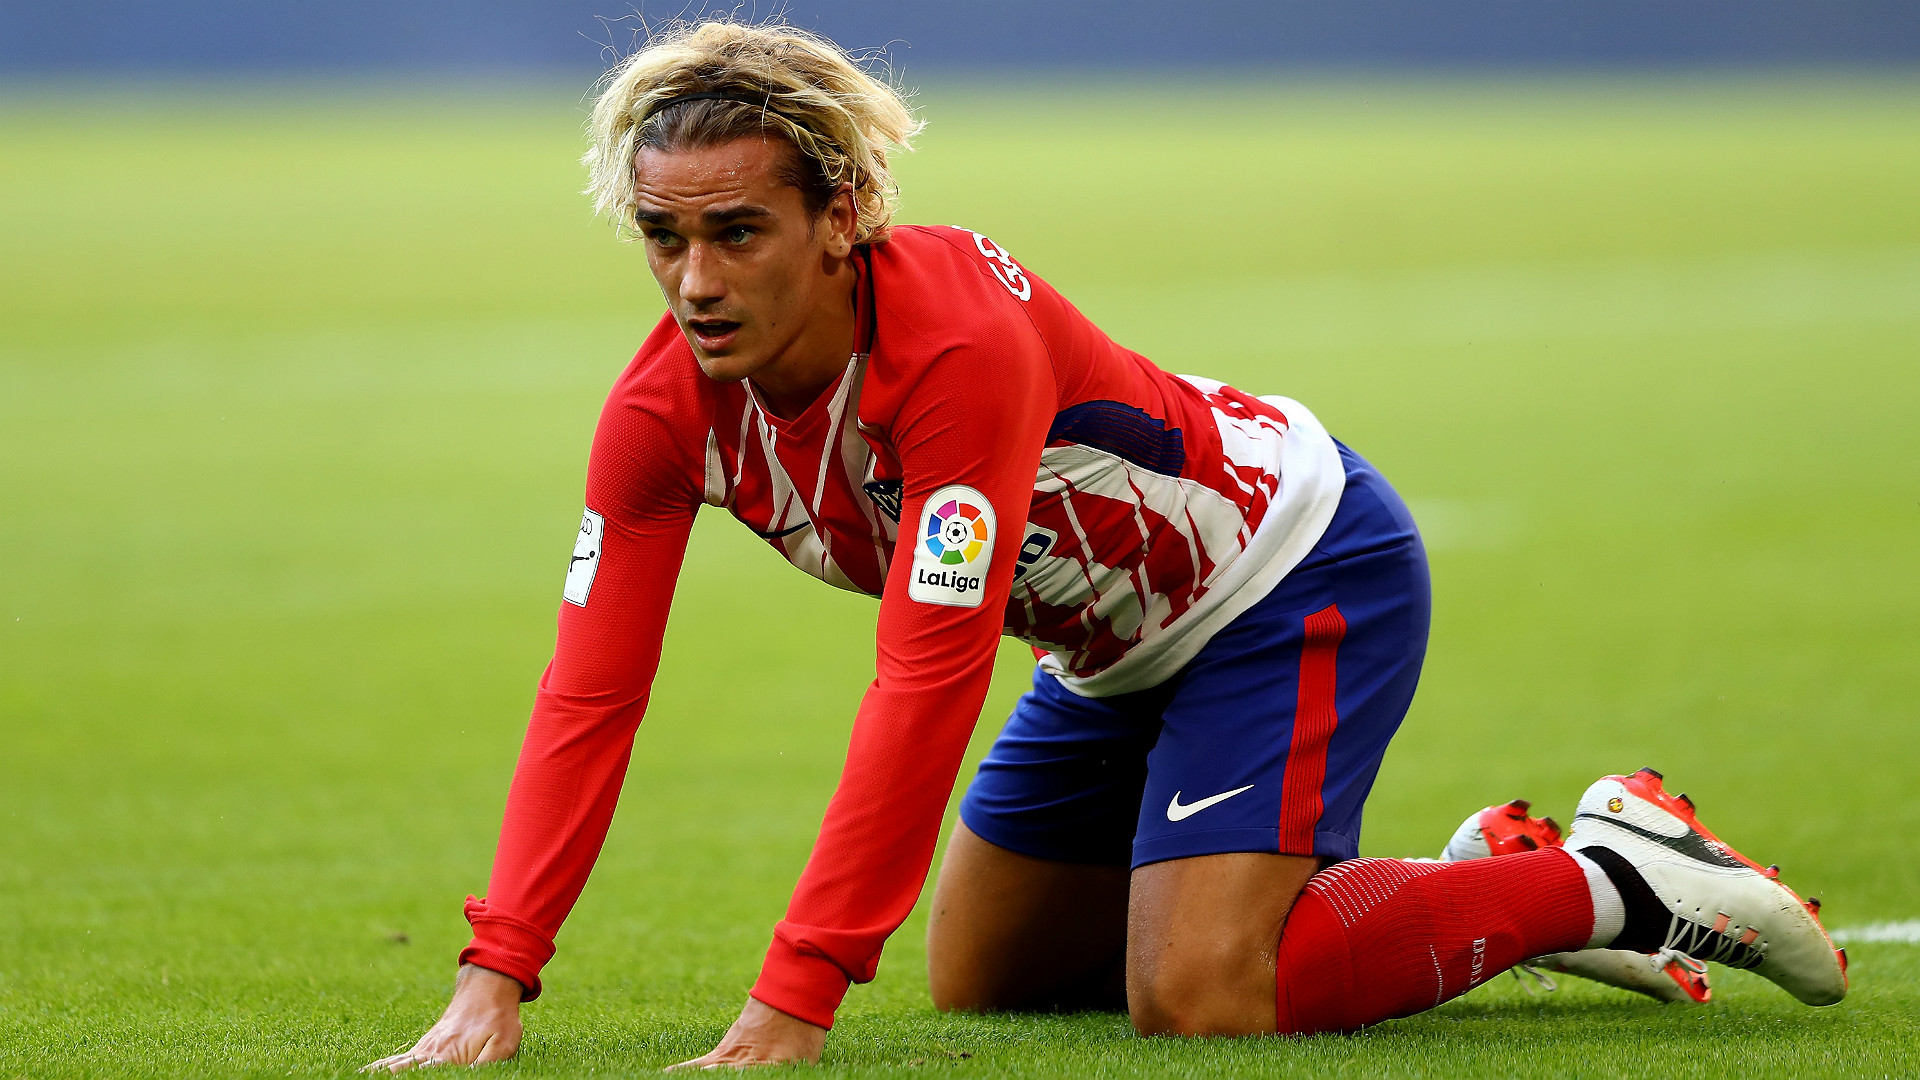 Antoine Griezmann Atletico Madrid Player Wallpapers